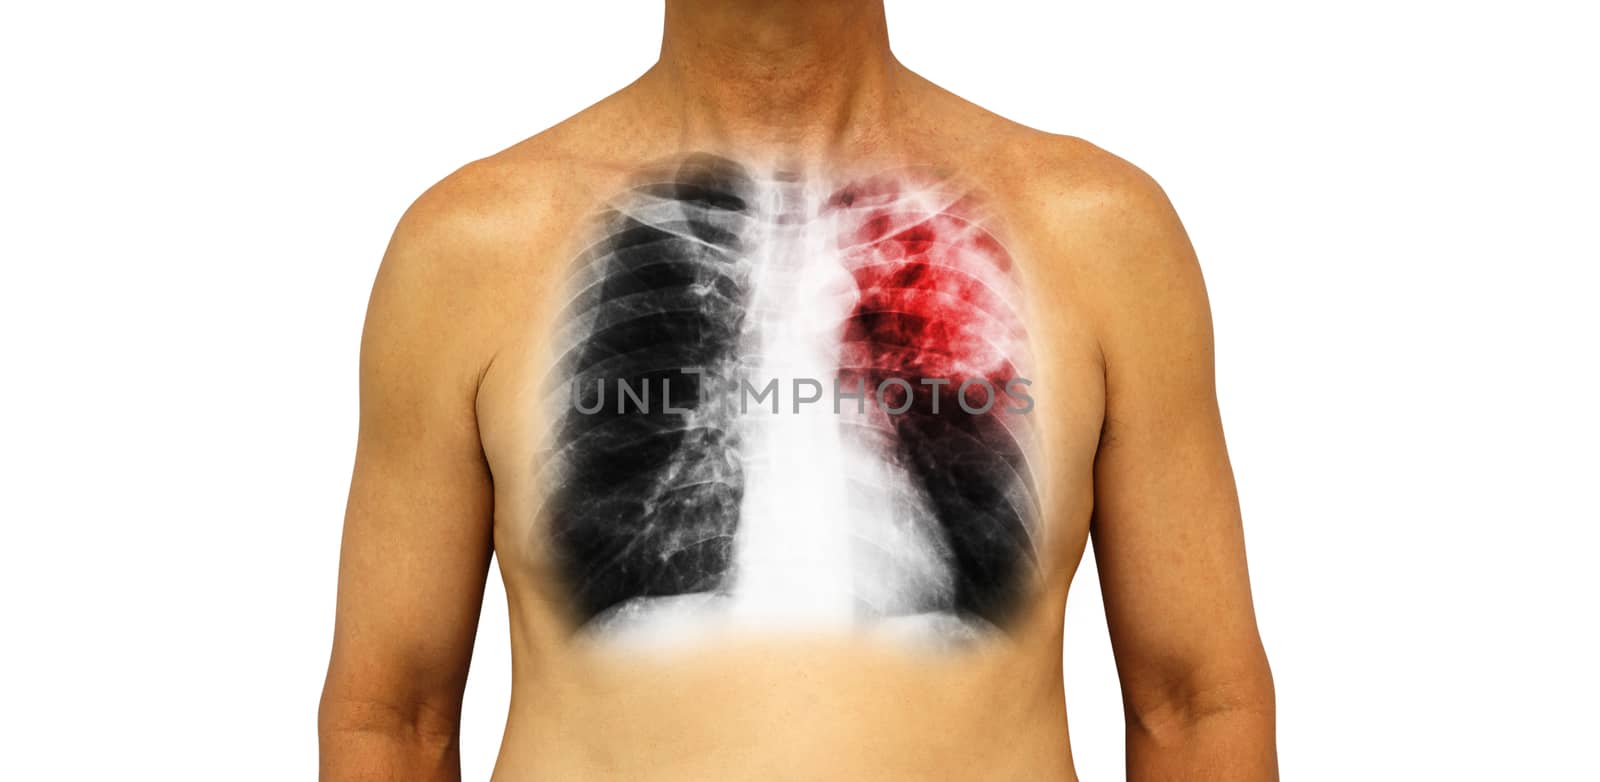 Pulmonary tuberculosis . Human chest with x-ray show patchy infiltrate left upper lung due to infection . Isolated background by stockdevil